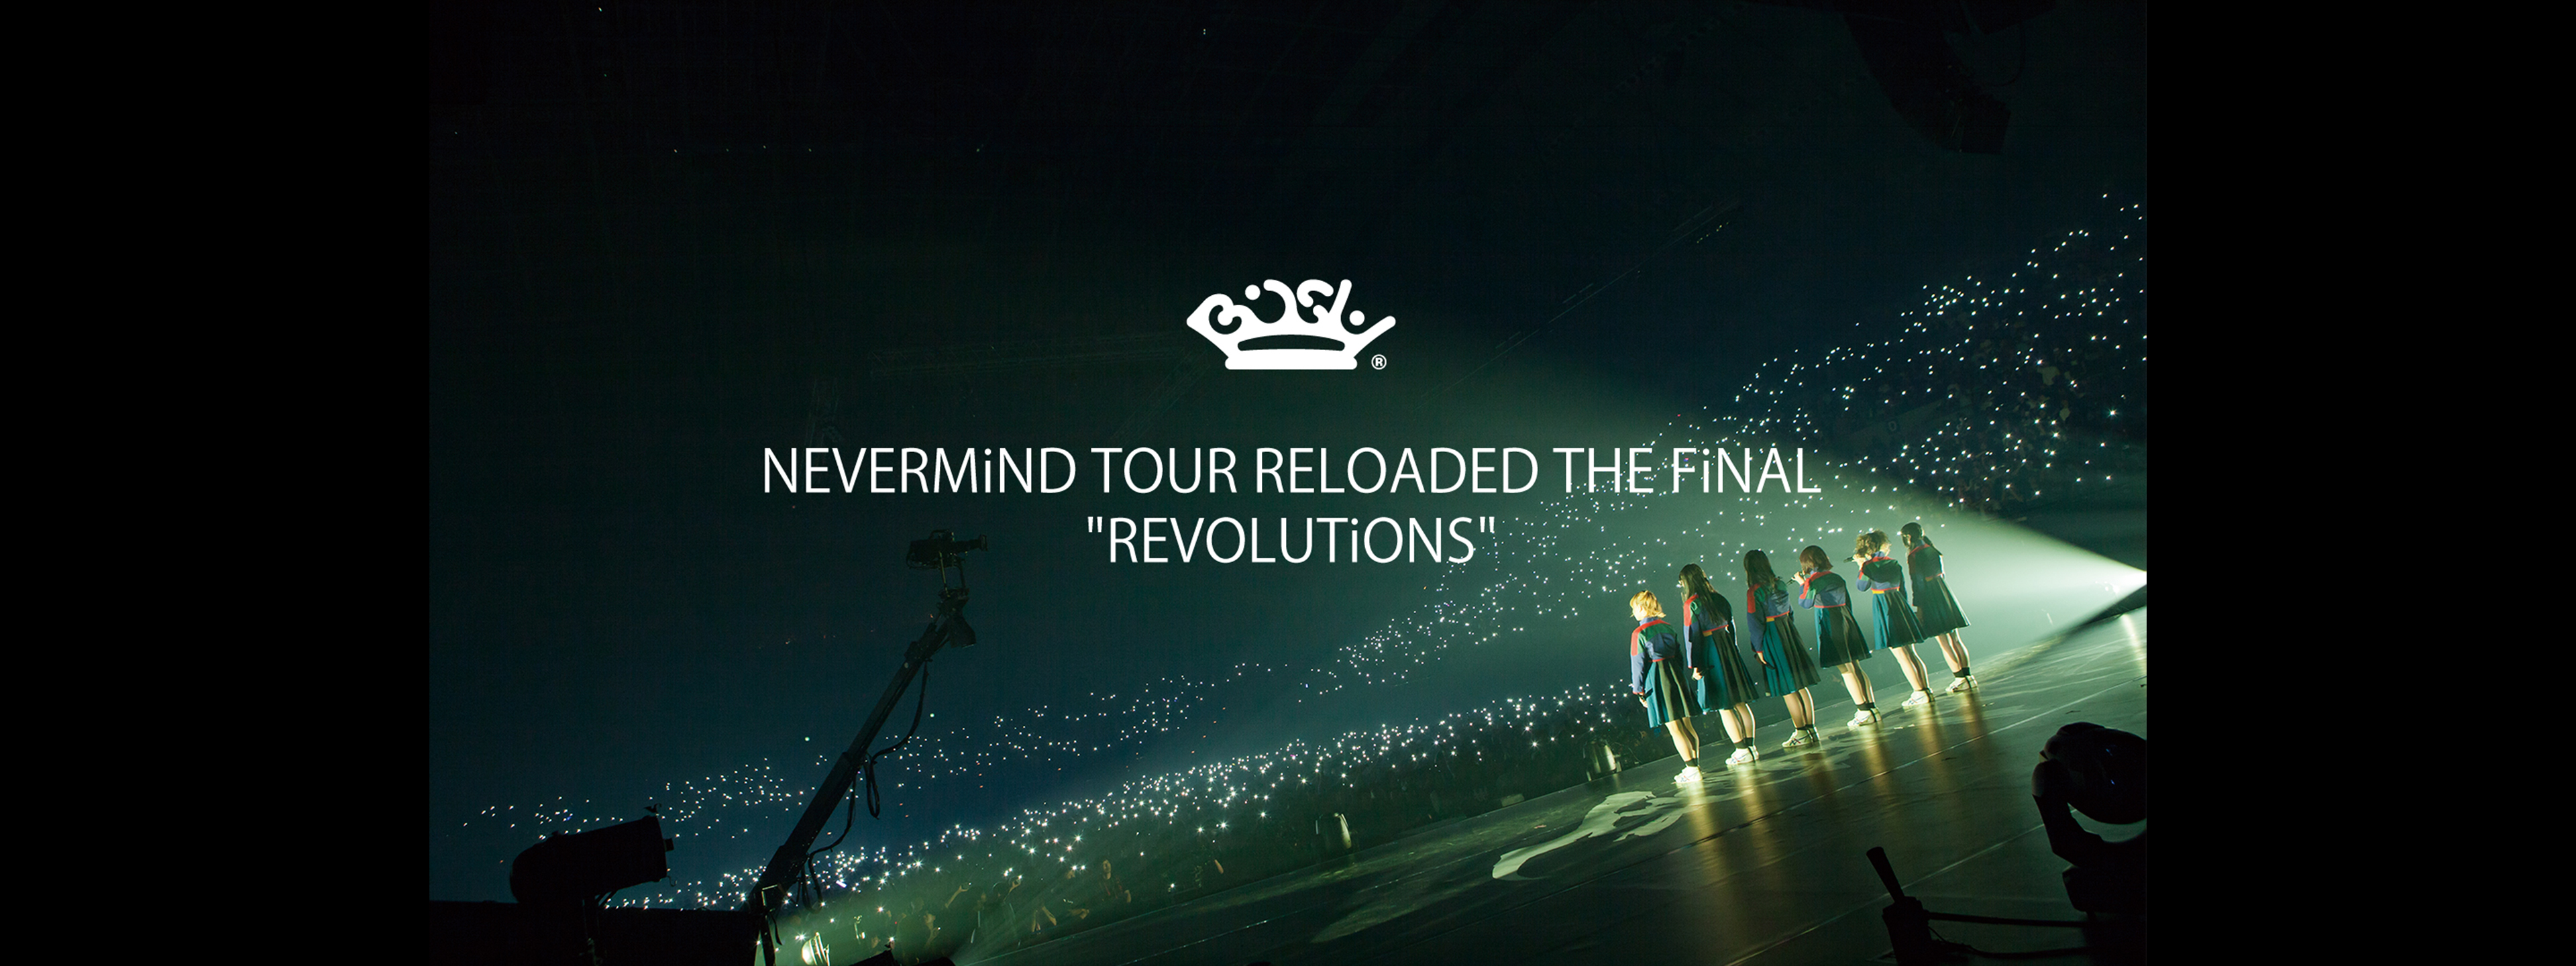 NEVERMiND TOUR RELOADED THE FiNAL